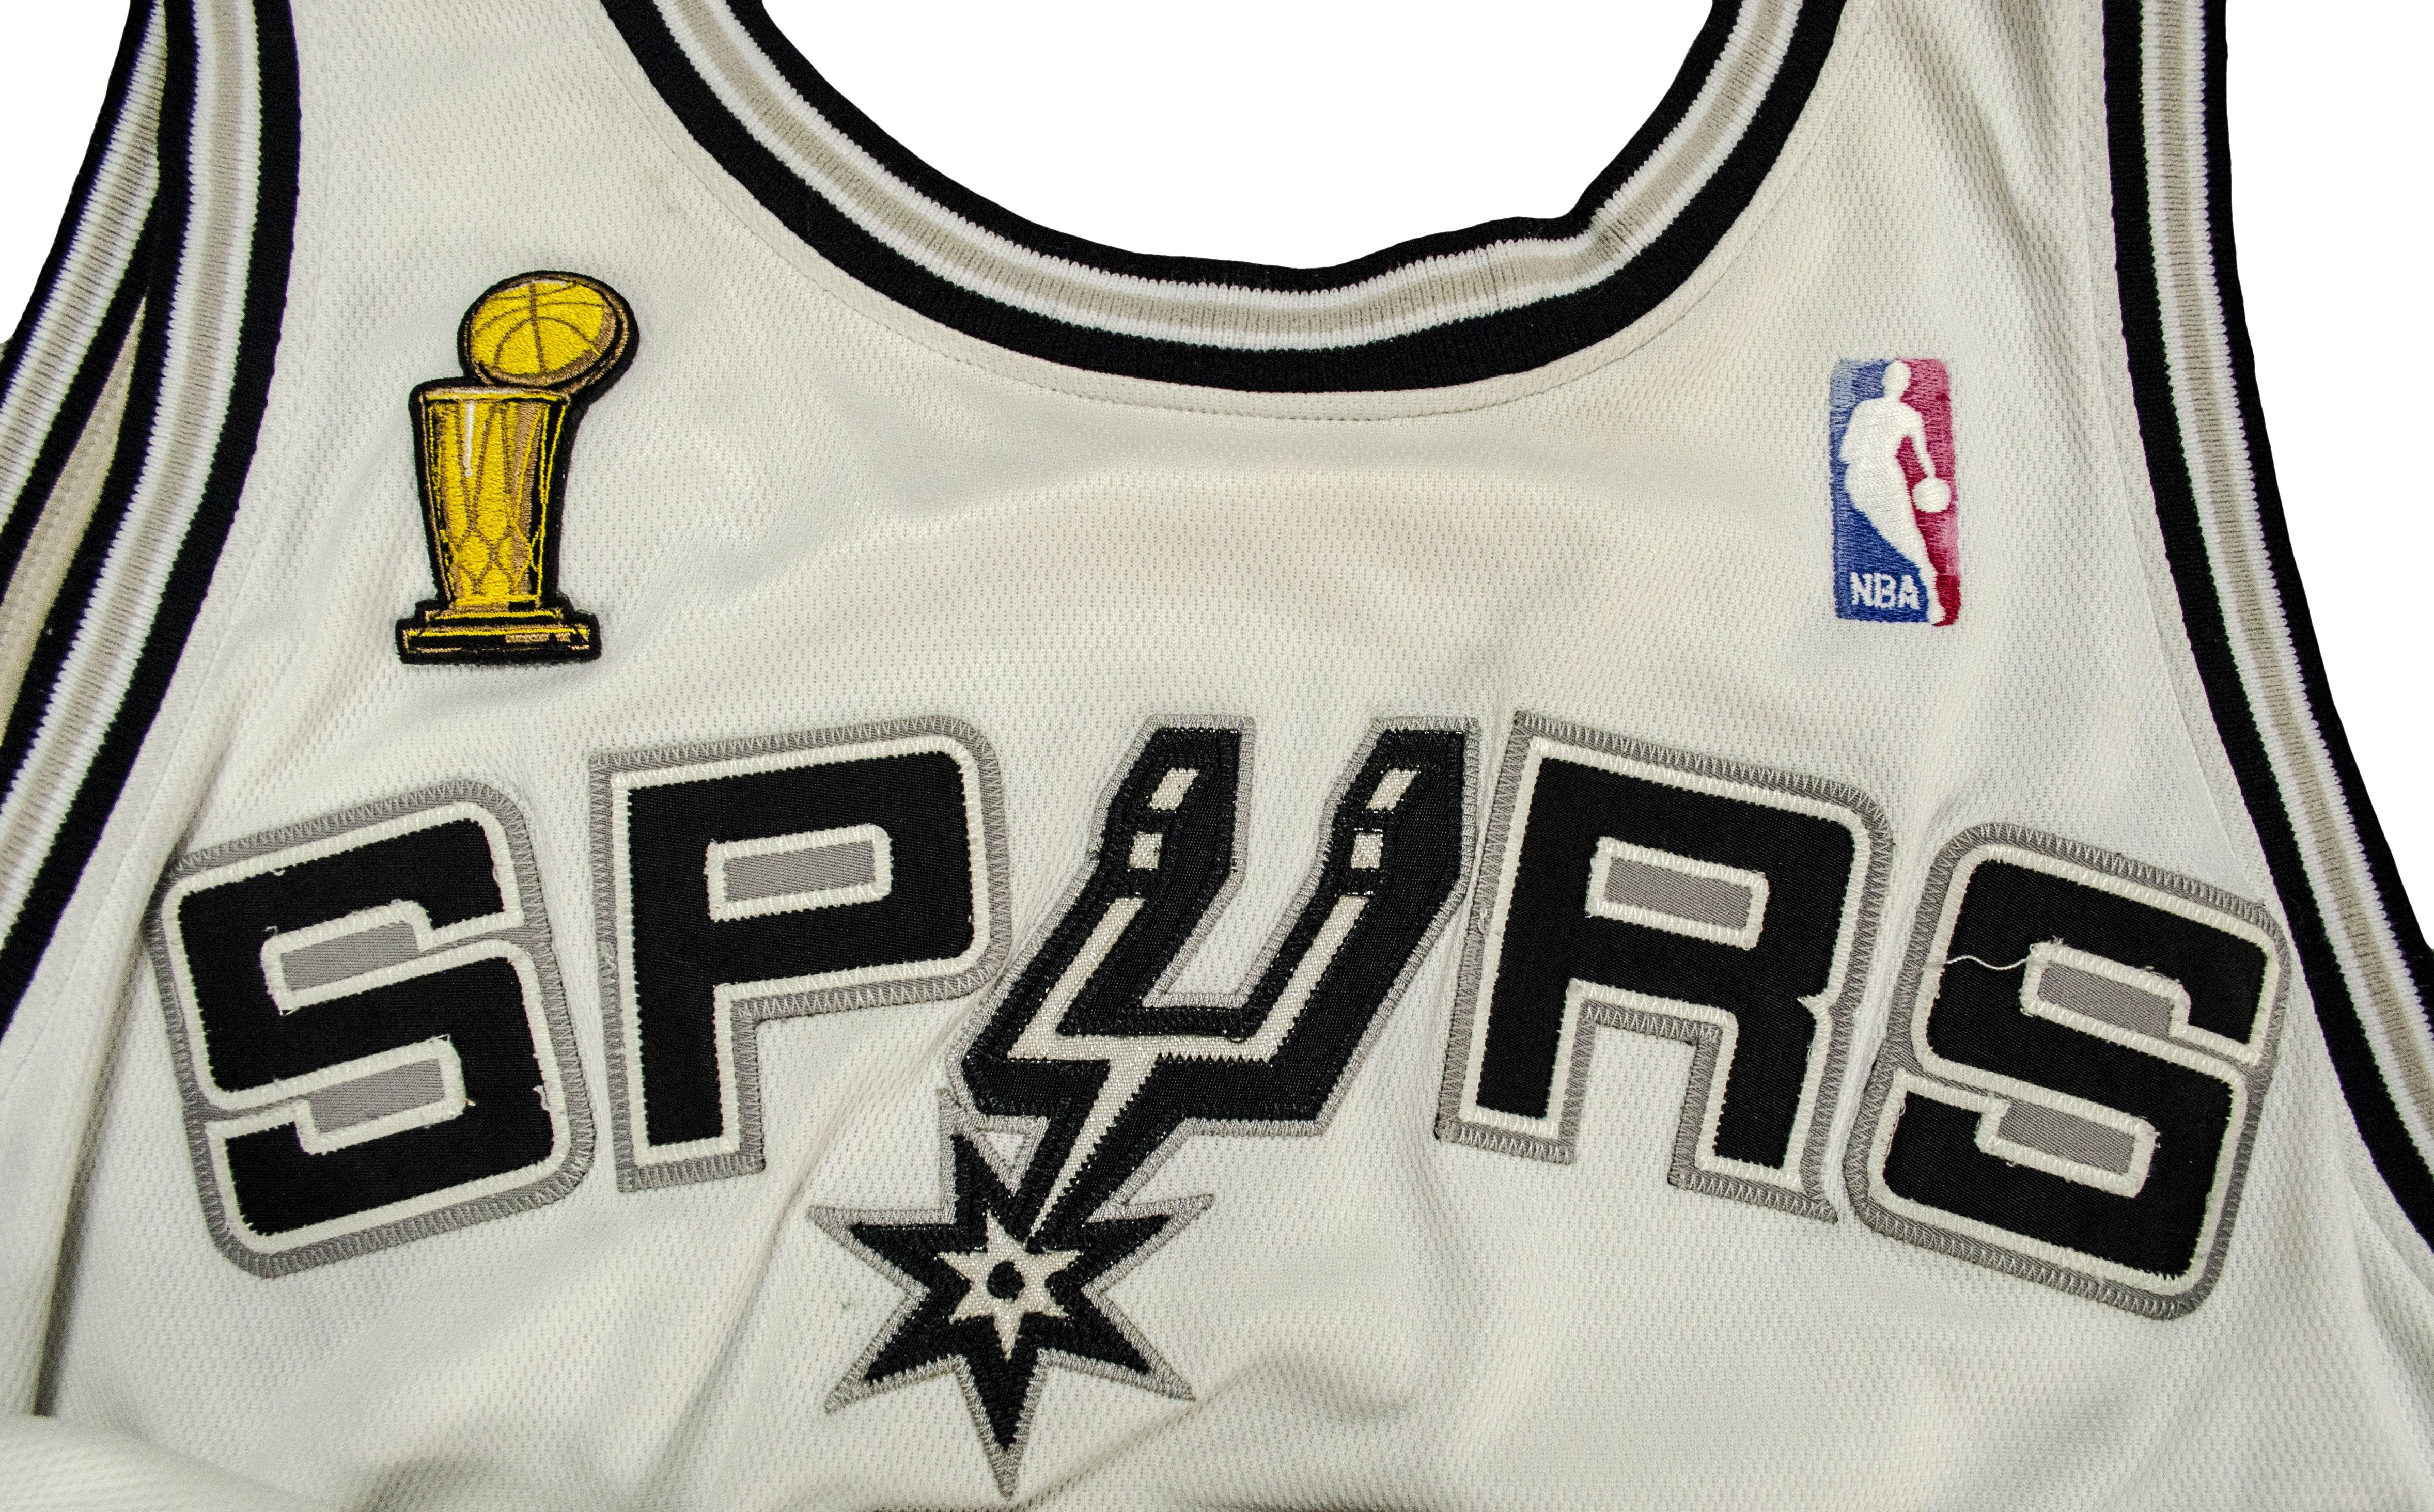 spurs holiday jersey